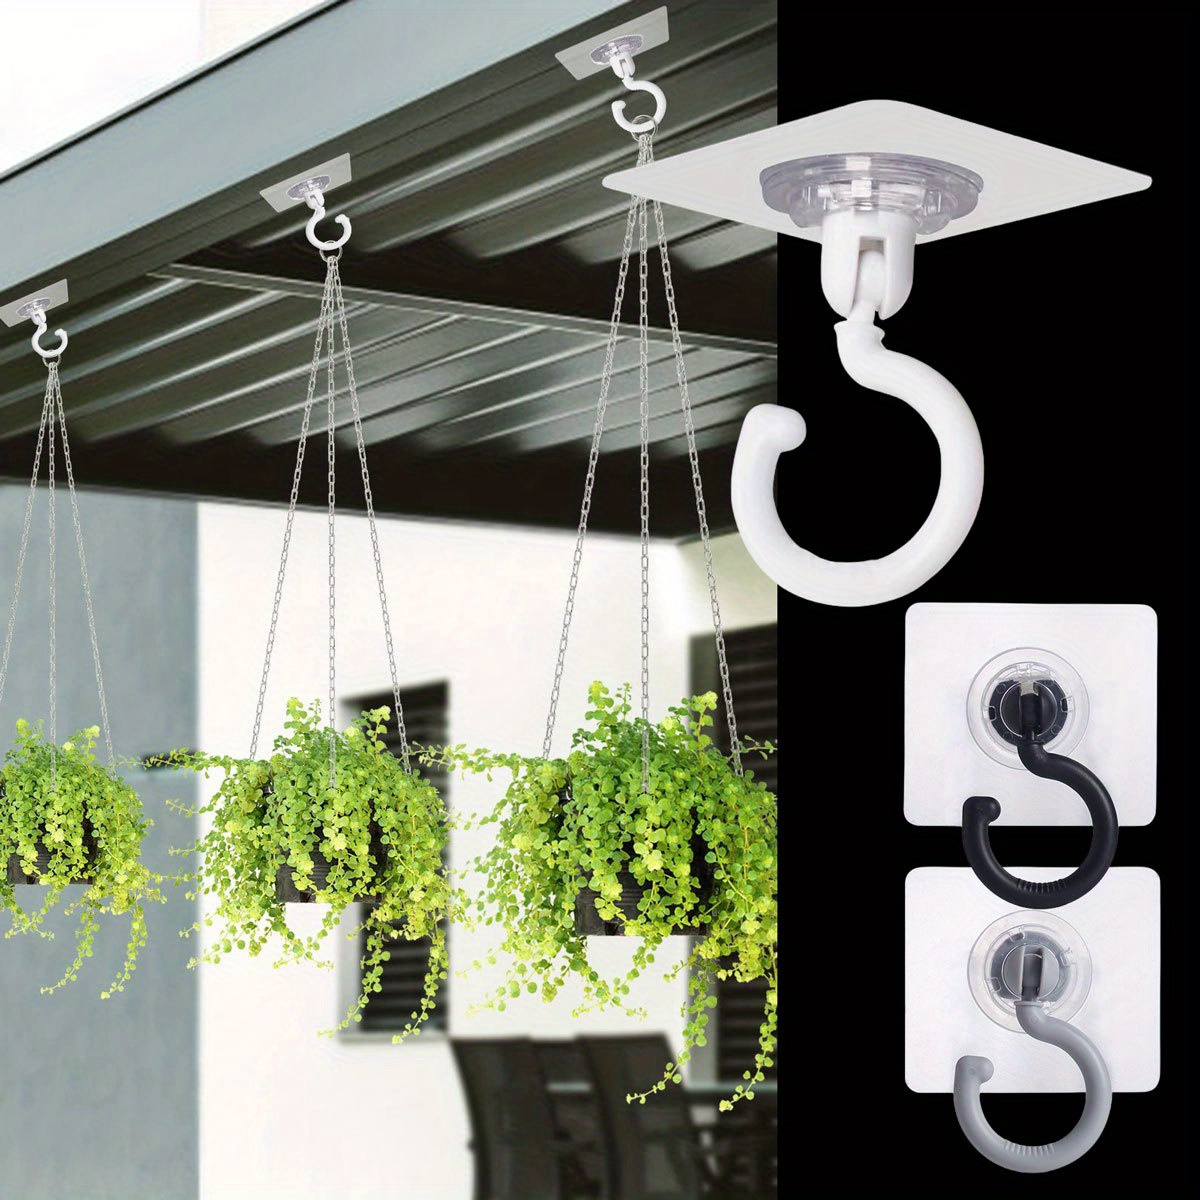 60 Drop Ceiling Hooks for Classrooms & Offices, White Heavy Duty Ceiling  Hooks for Hanging Plants & Decorations, Metal T-Bar Hooks for Suspended  Drop